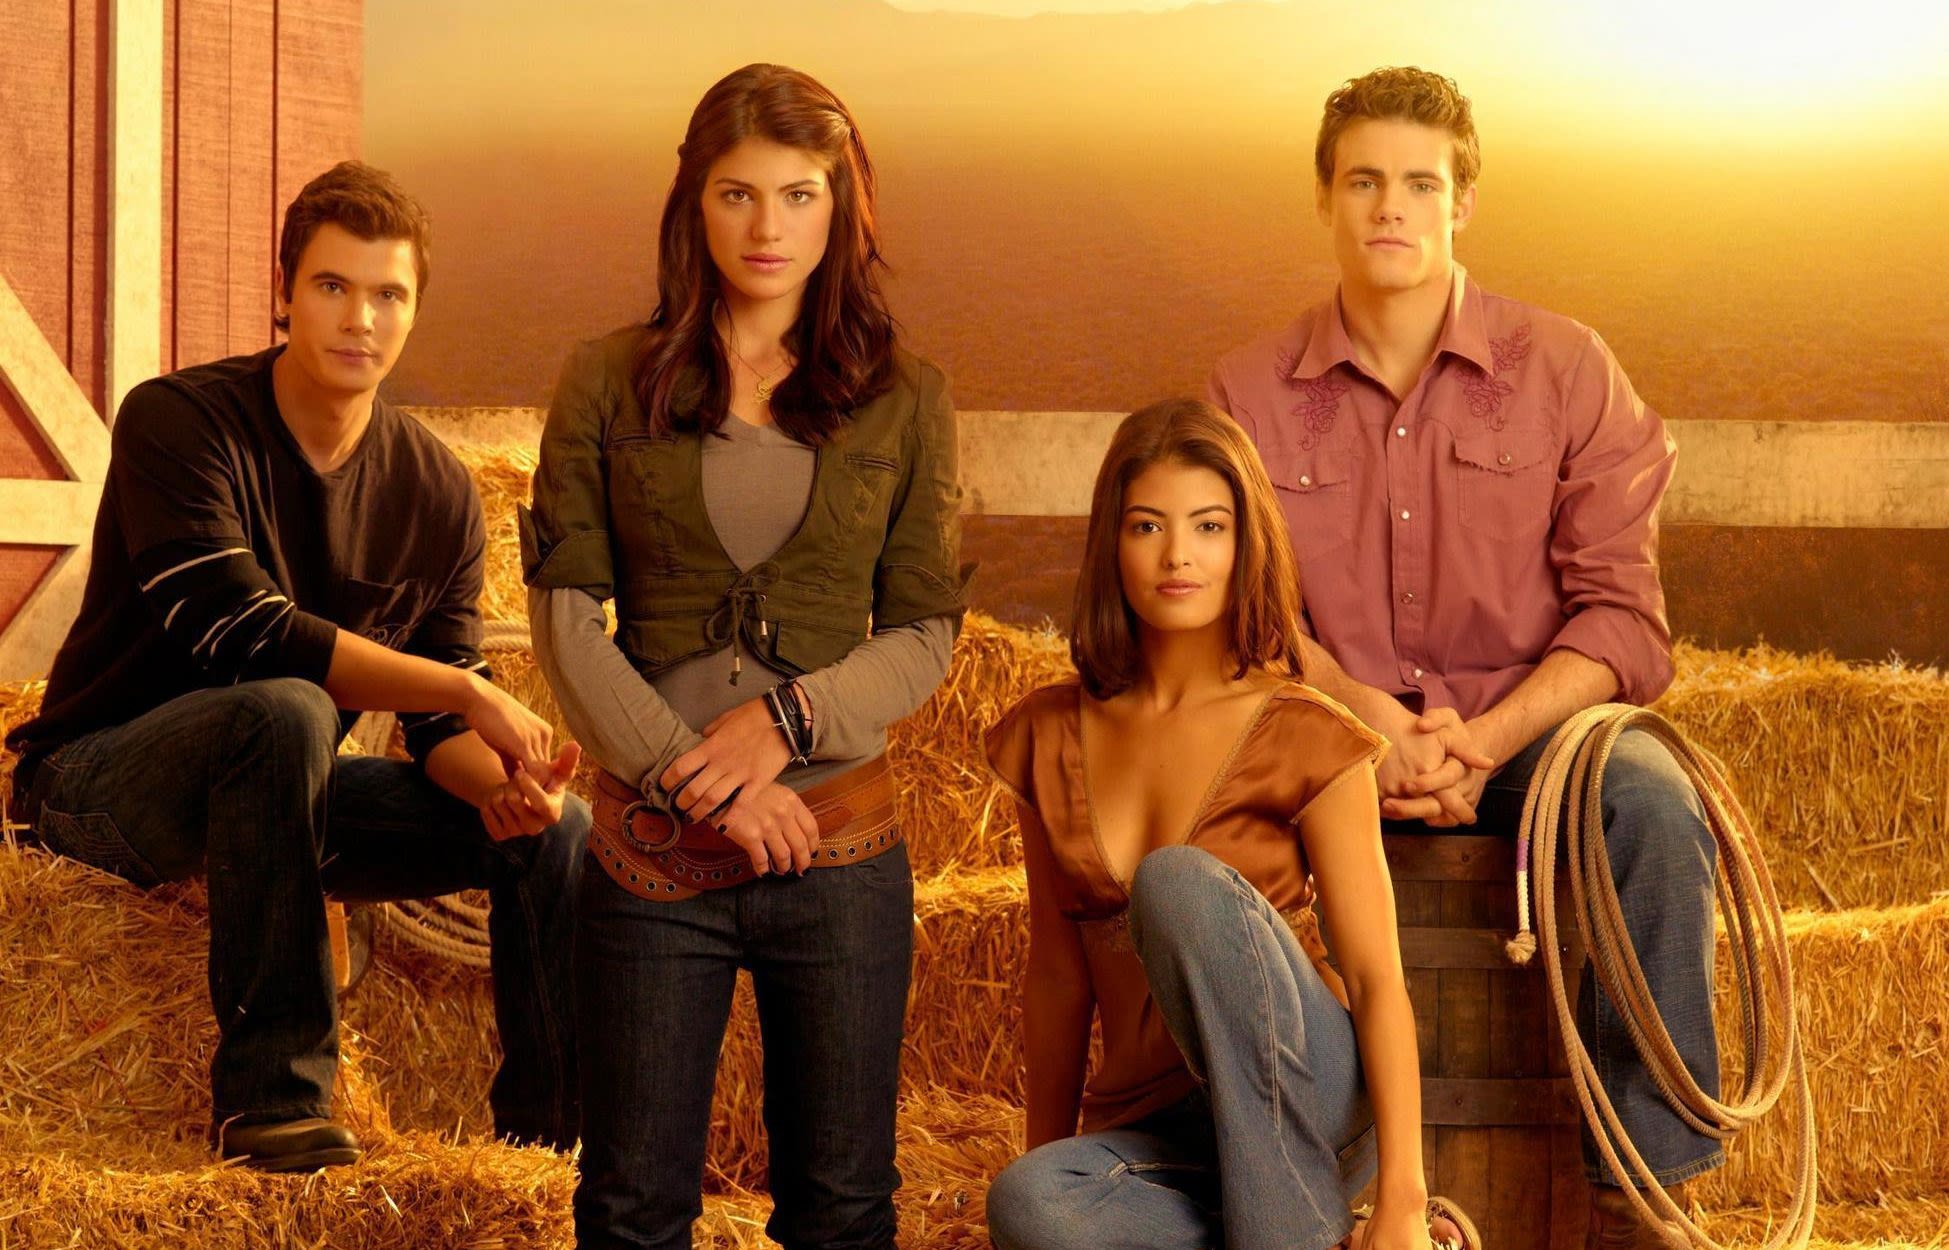 Mosey on Over and Catch Up With the Cast of the '00s Teen Drama Series 'Wildfire'